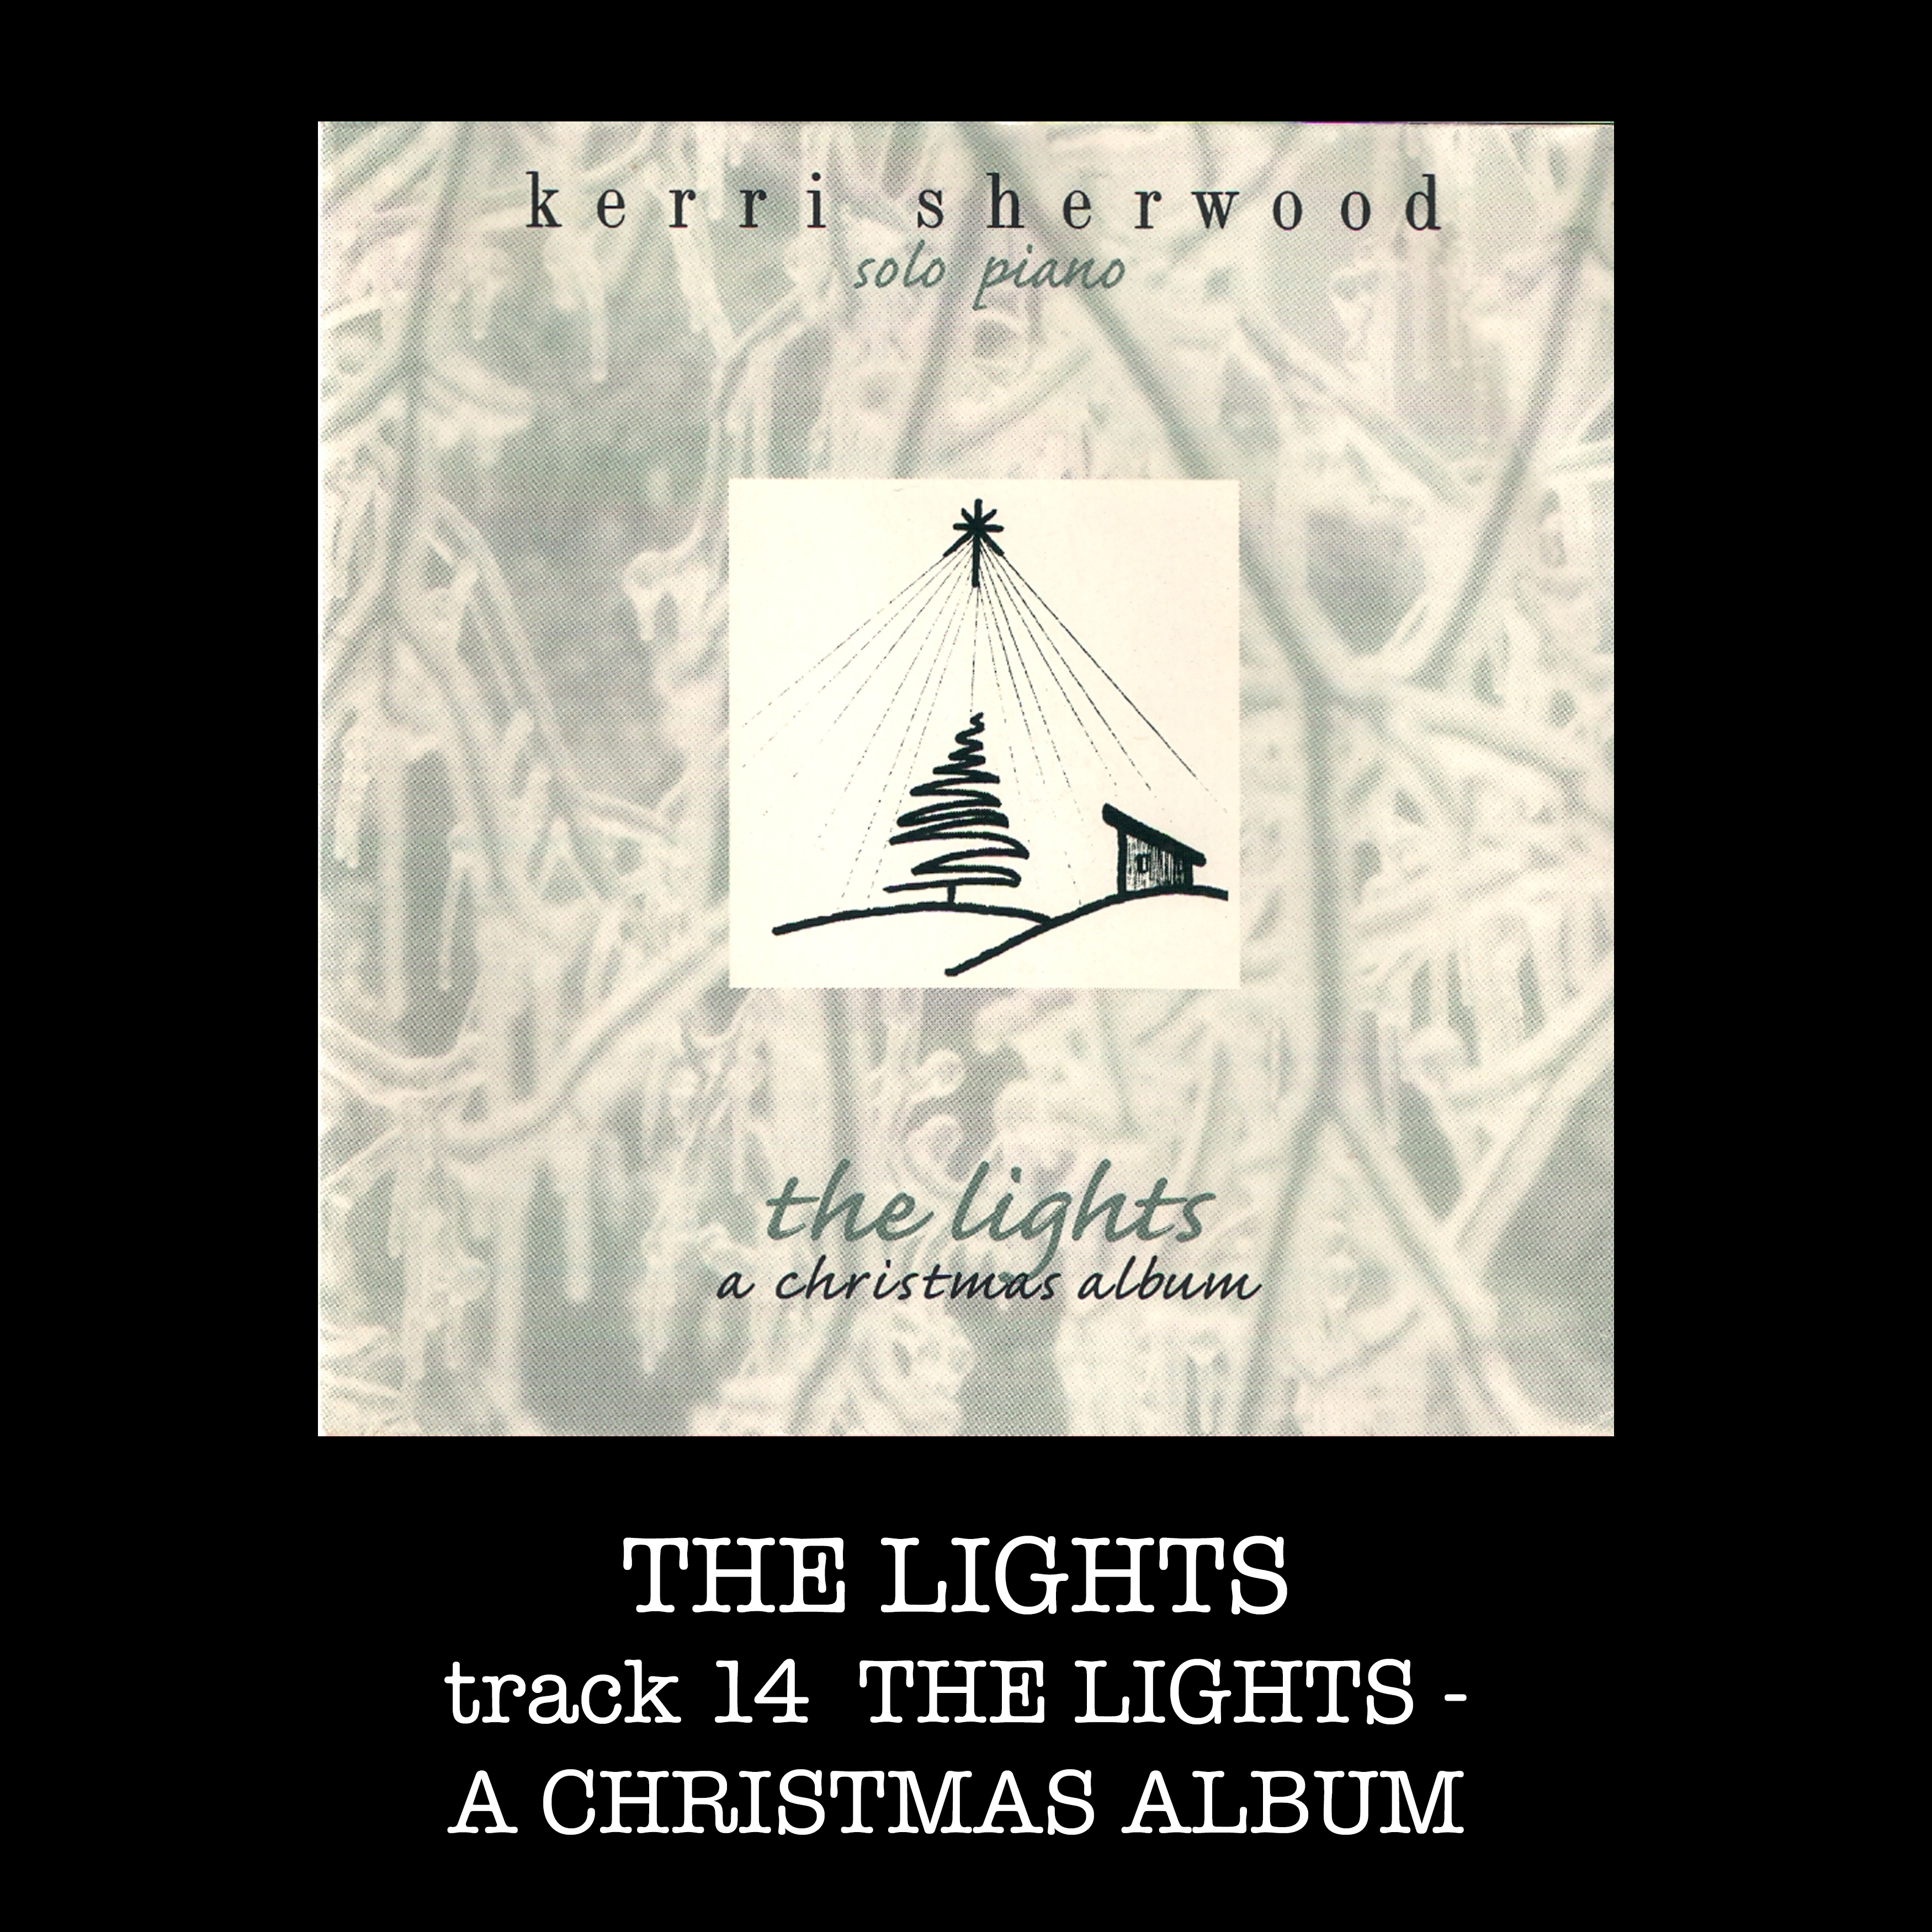 THE LIGHTS song box copy